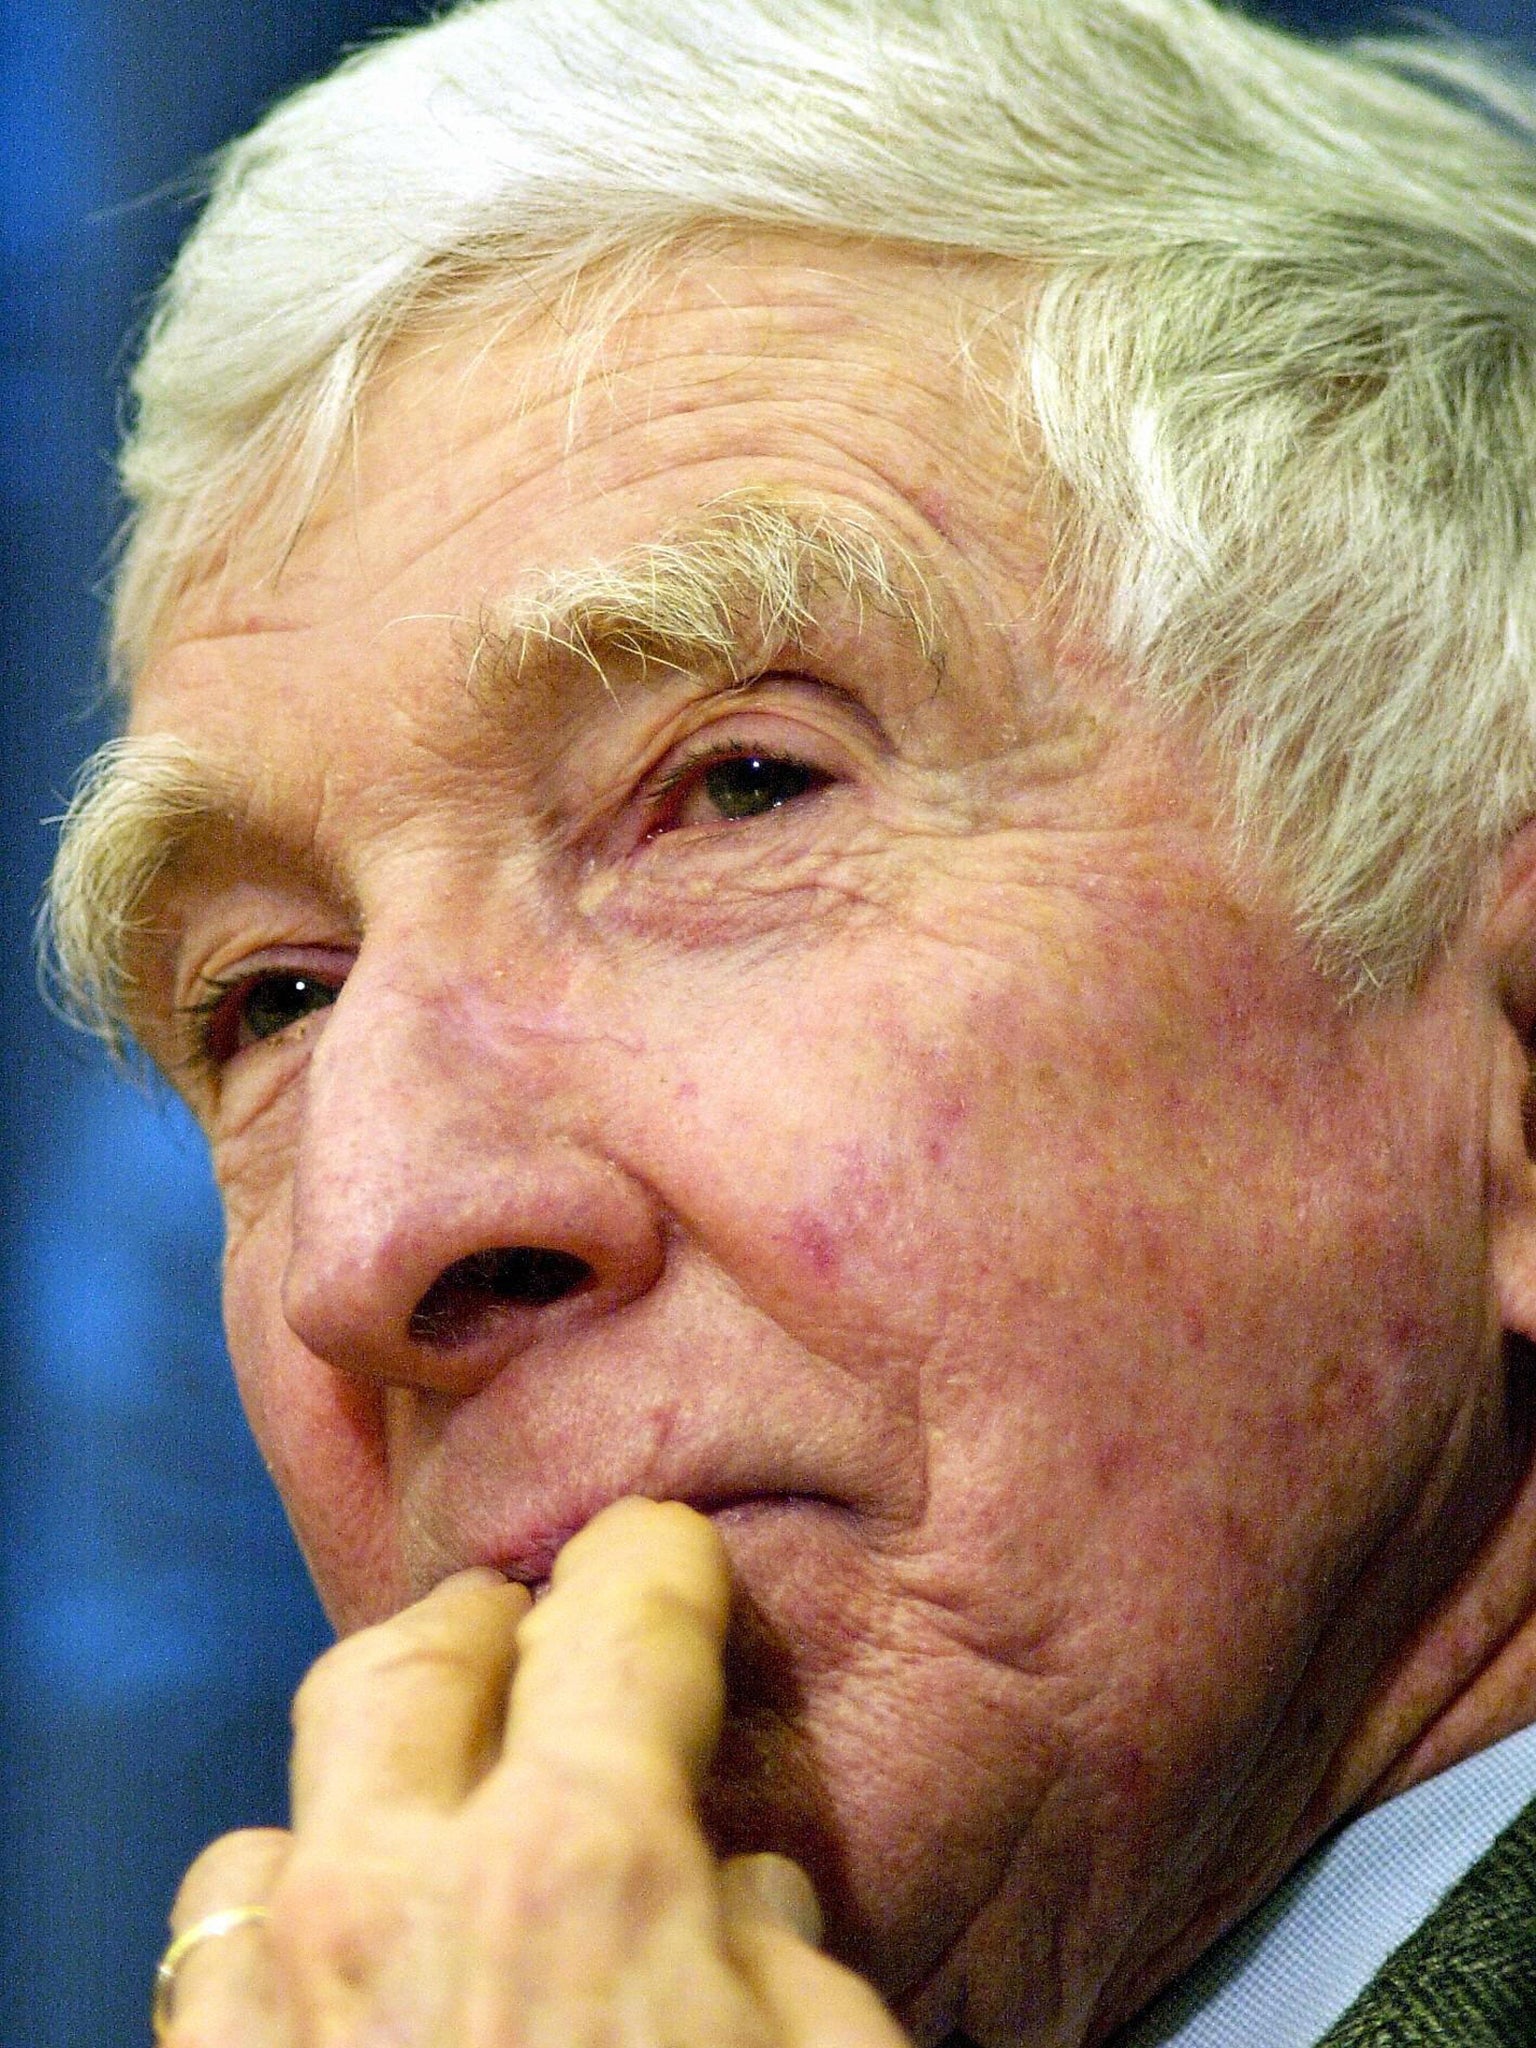 Updike: A literary life of remarkable ease